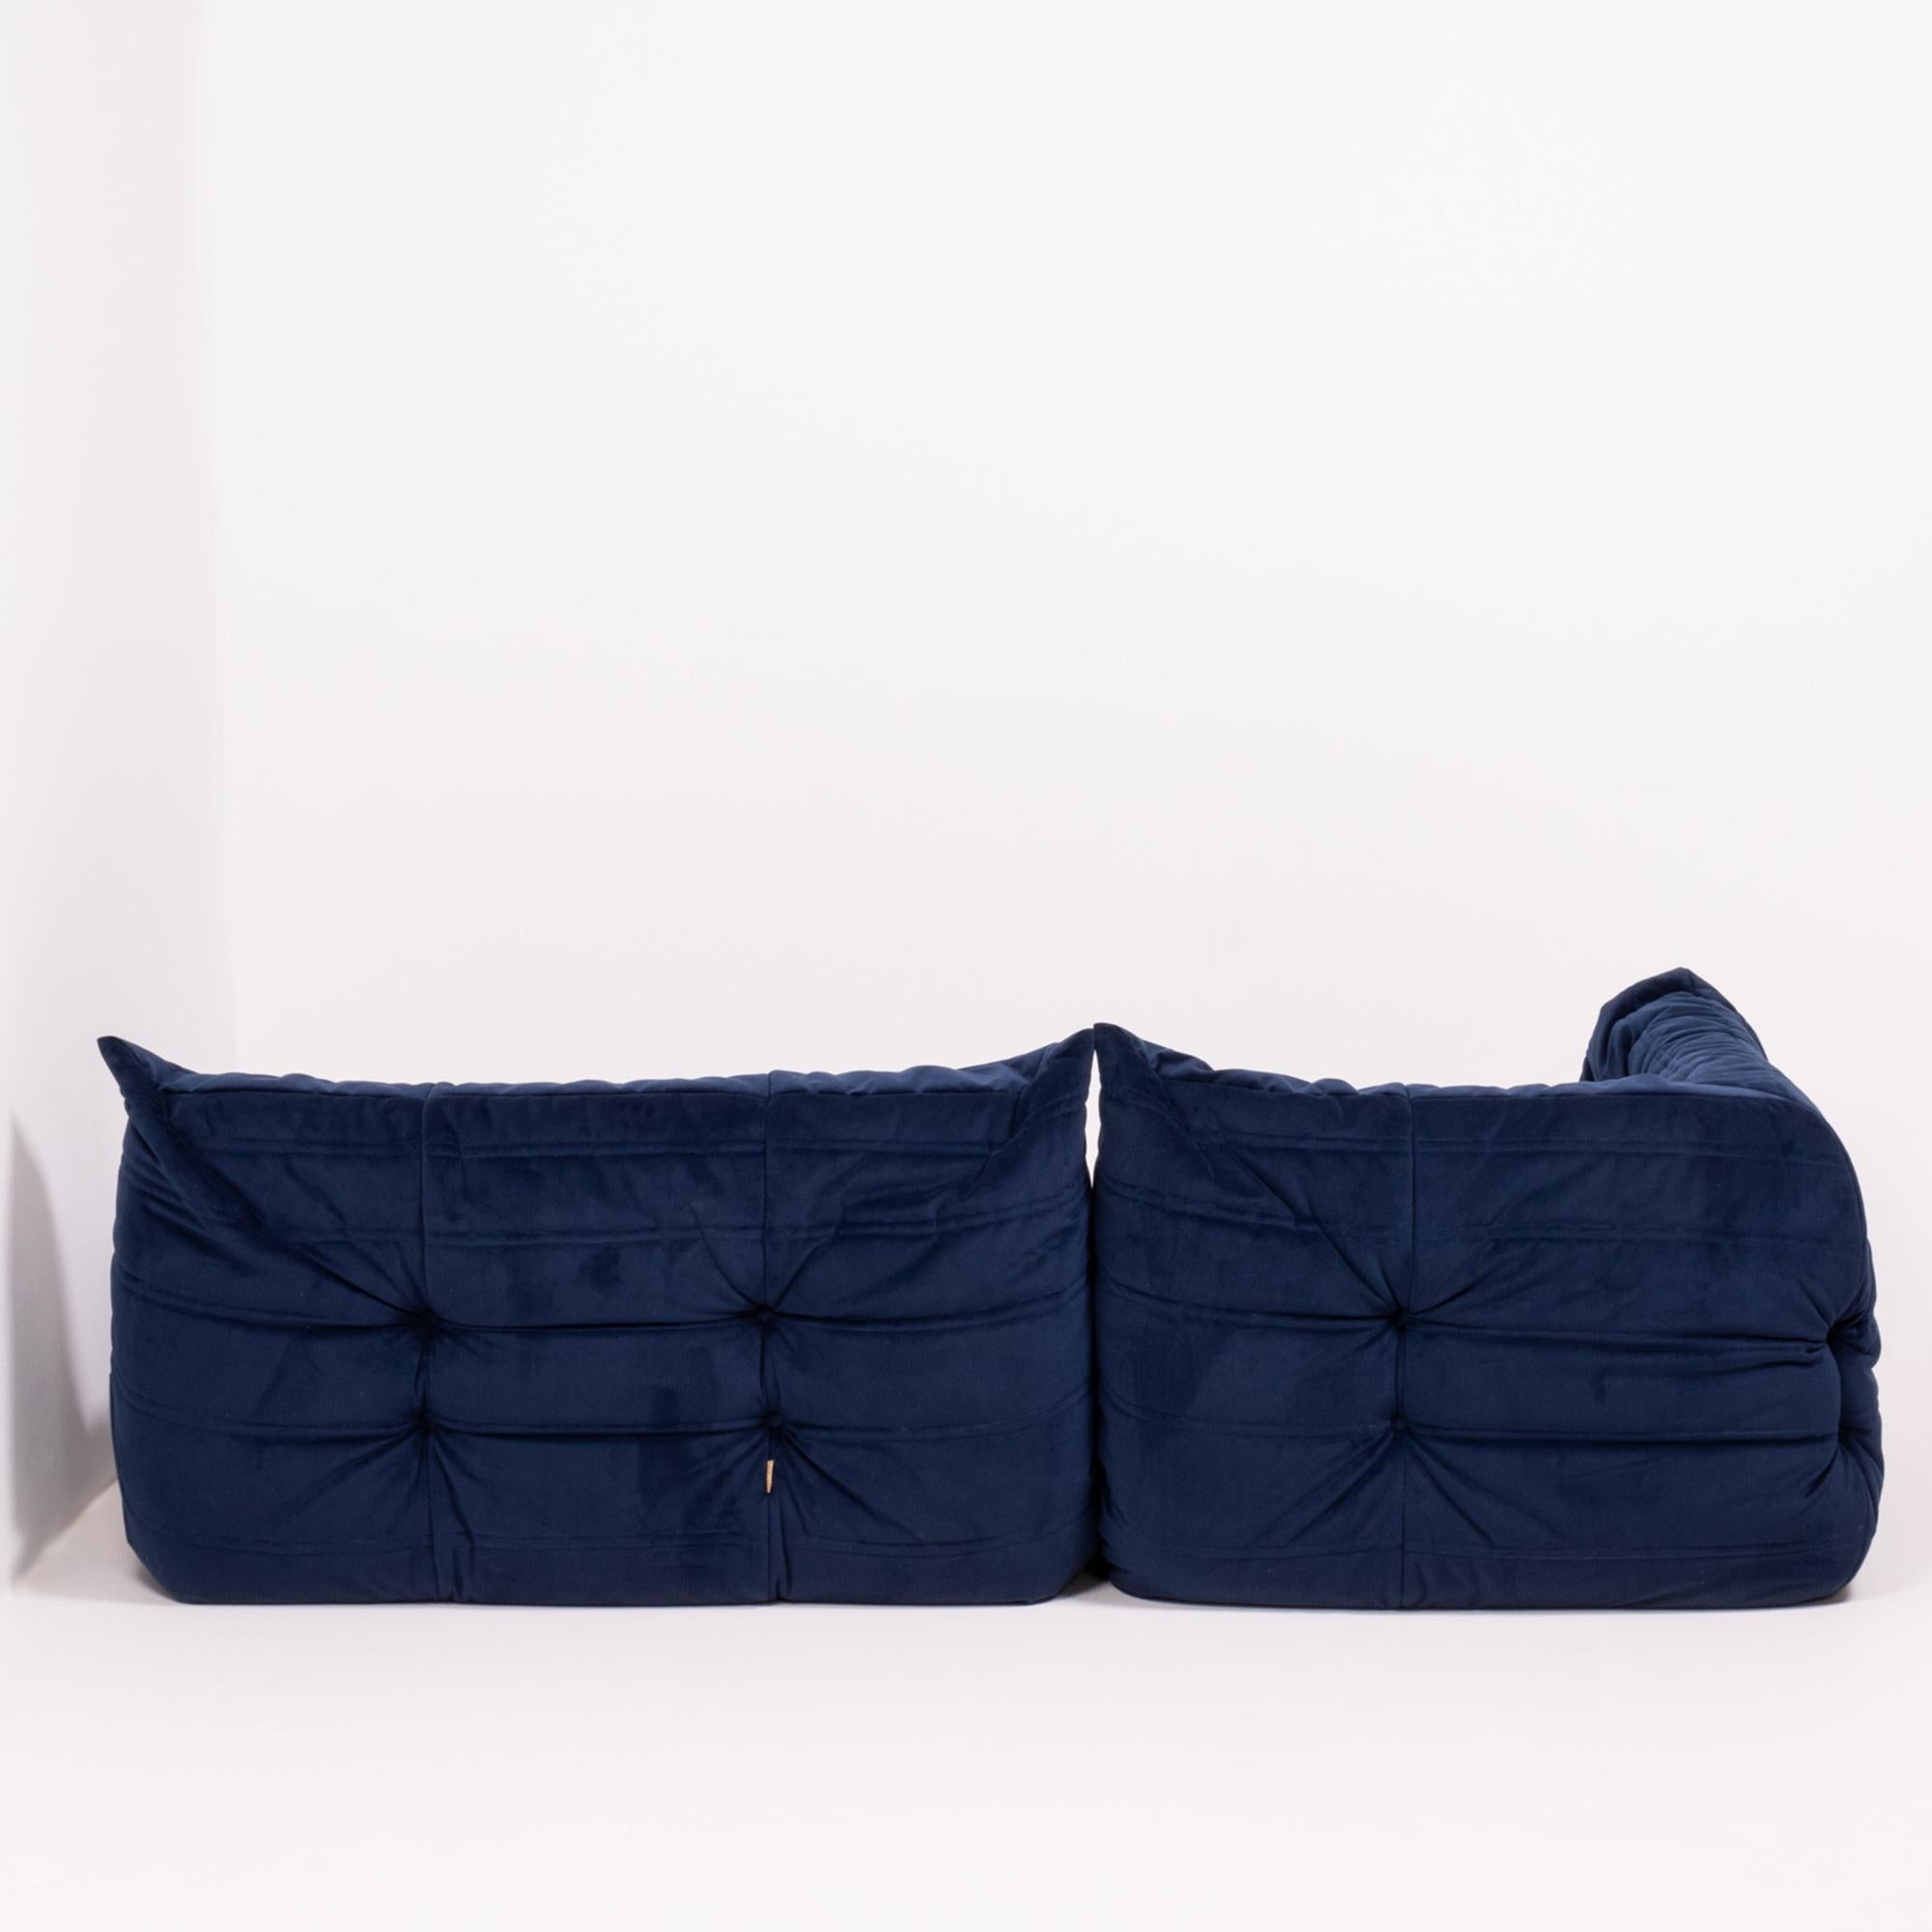 Fabric Togo Blue Modular Sofa and Footstool by Michel Ducaroy for Ligne Roset